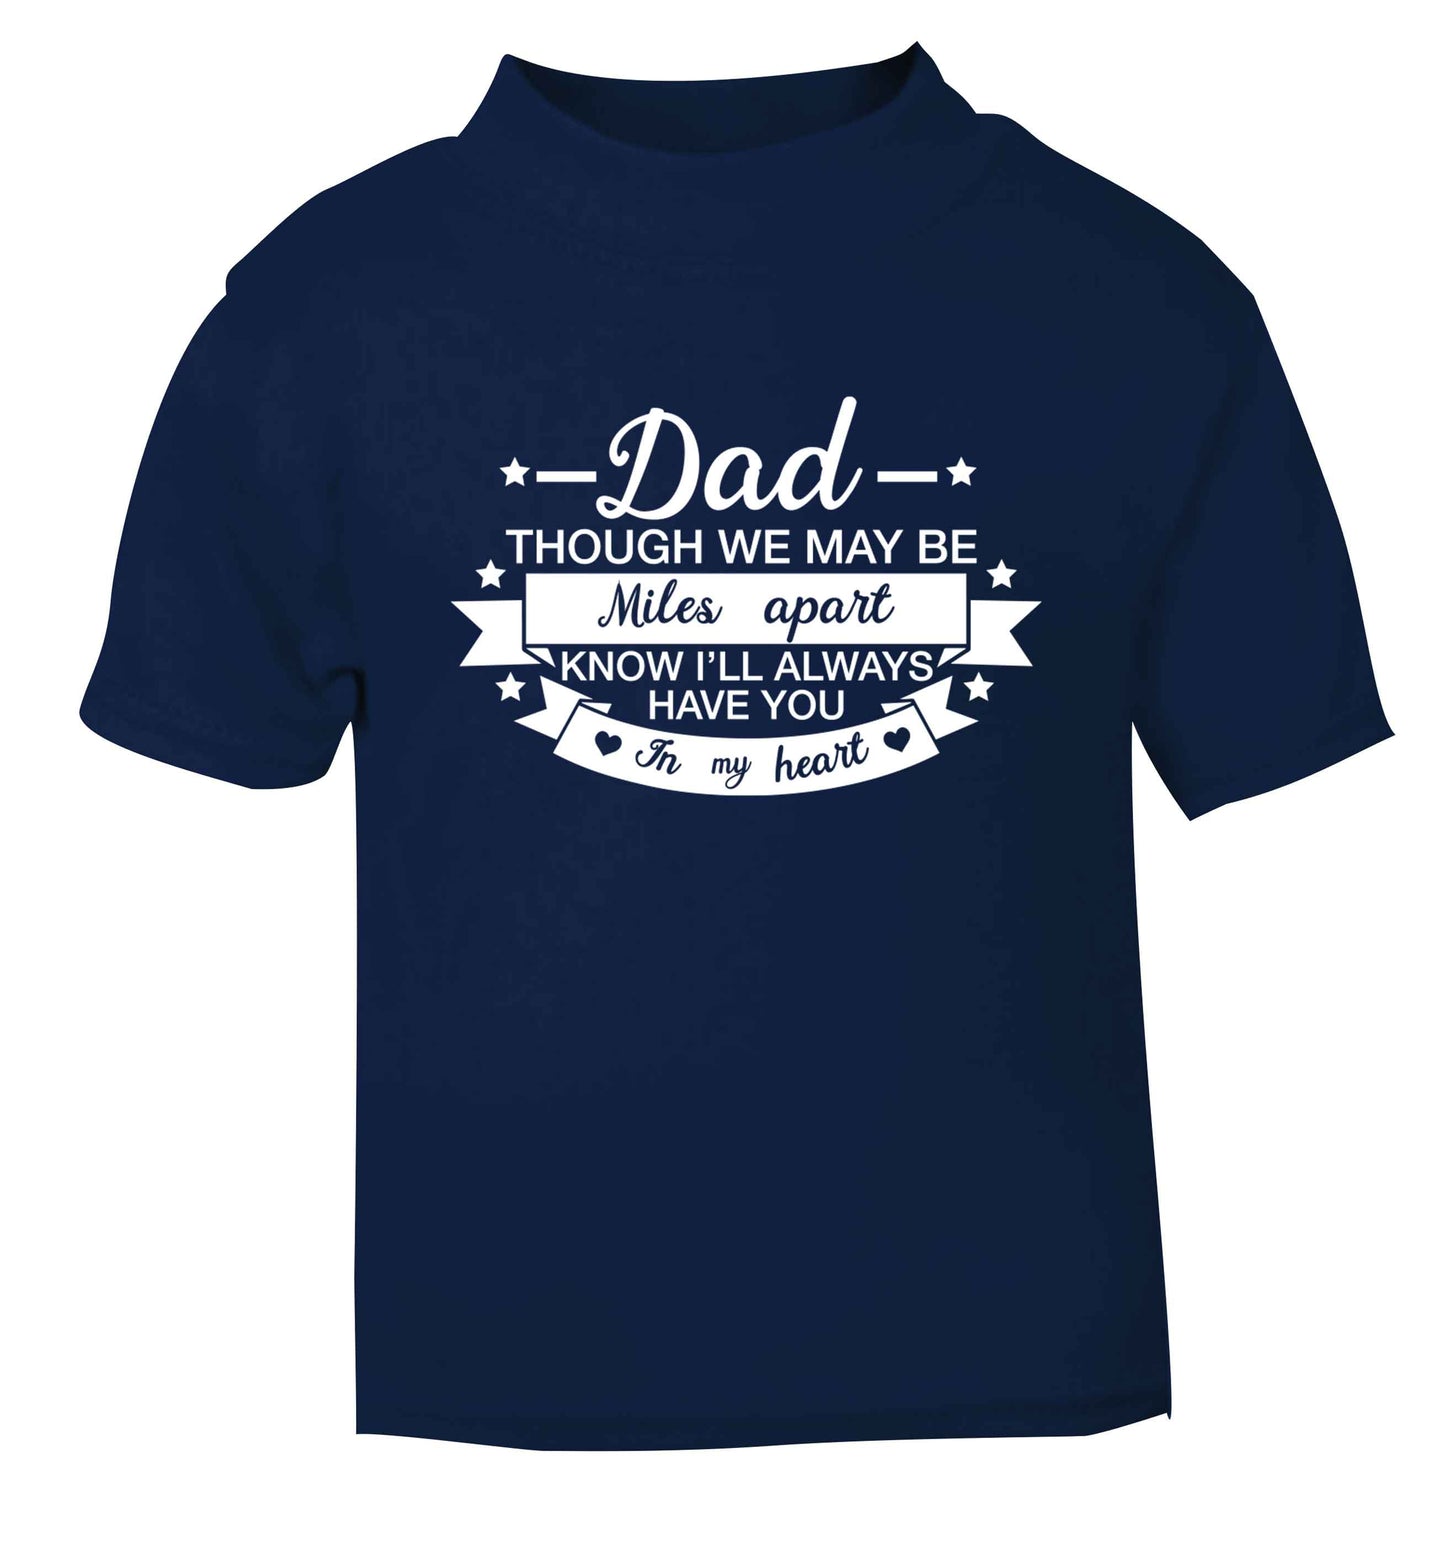 Dad though we are miles apart know I'll always have you in my heart navy baby toddler Tshirt 2 Years